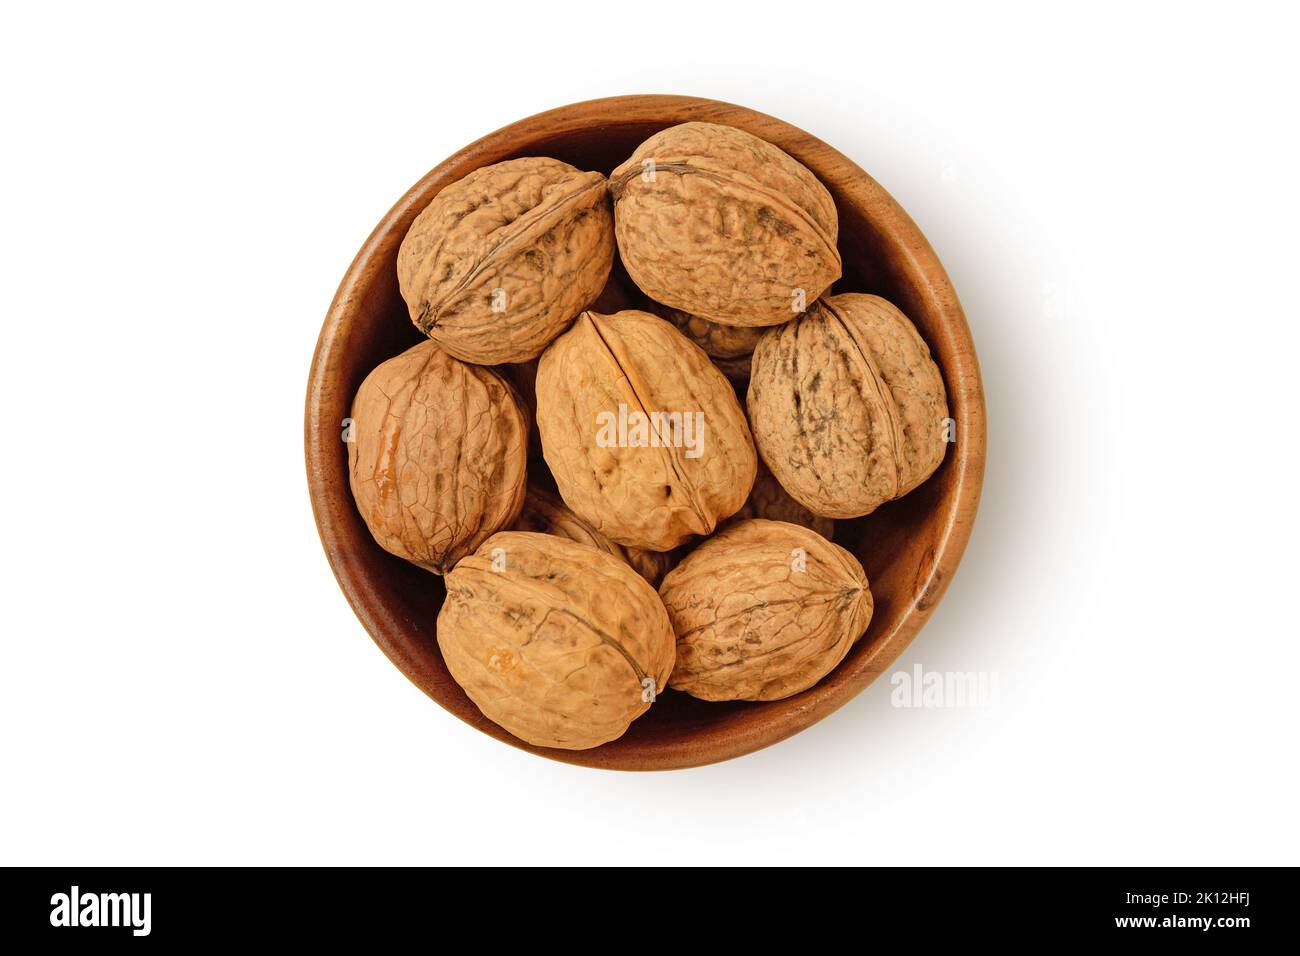 Shelled walnuts in wooden bowl on white background Stock Photo